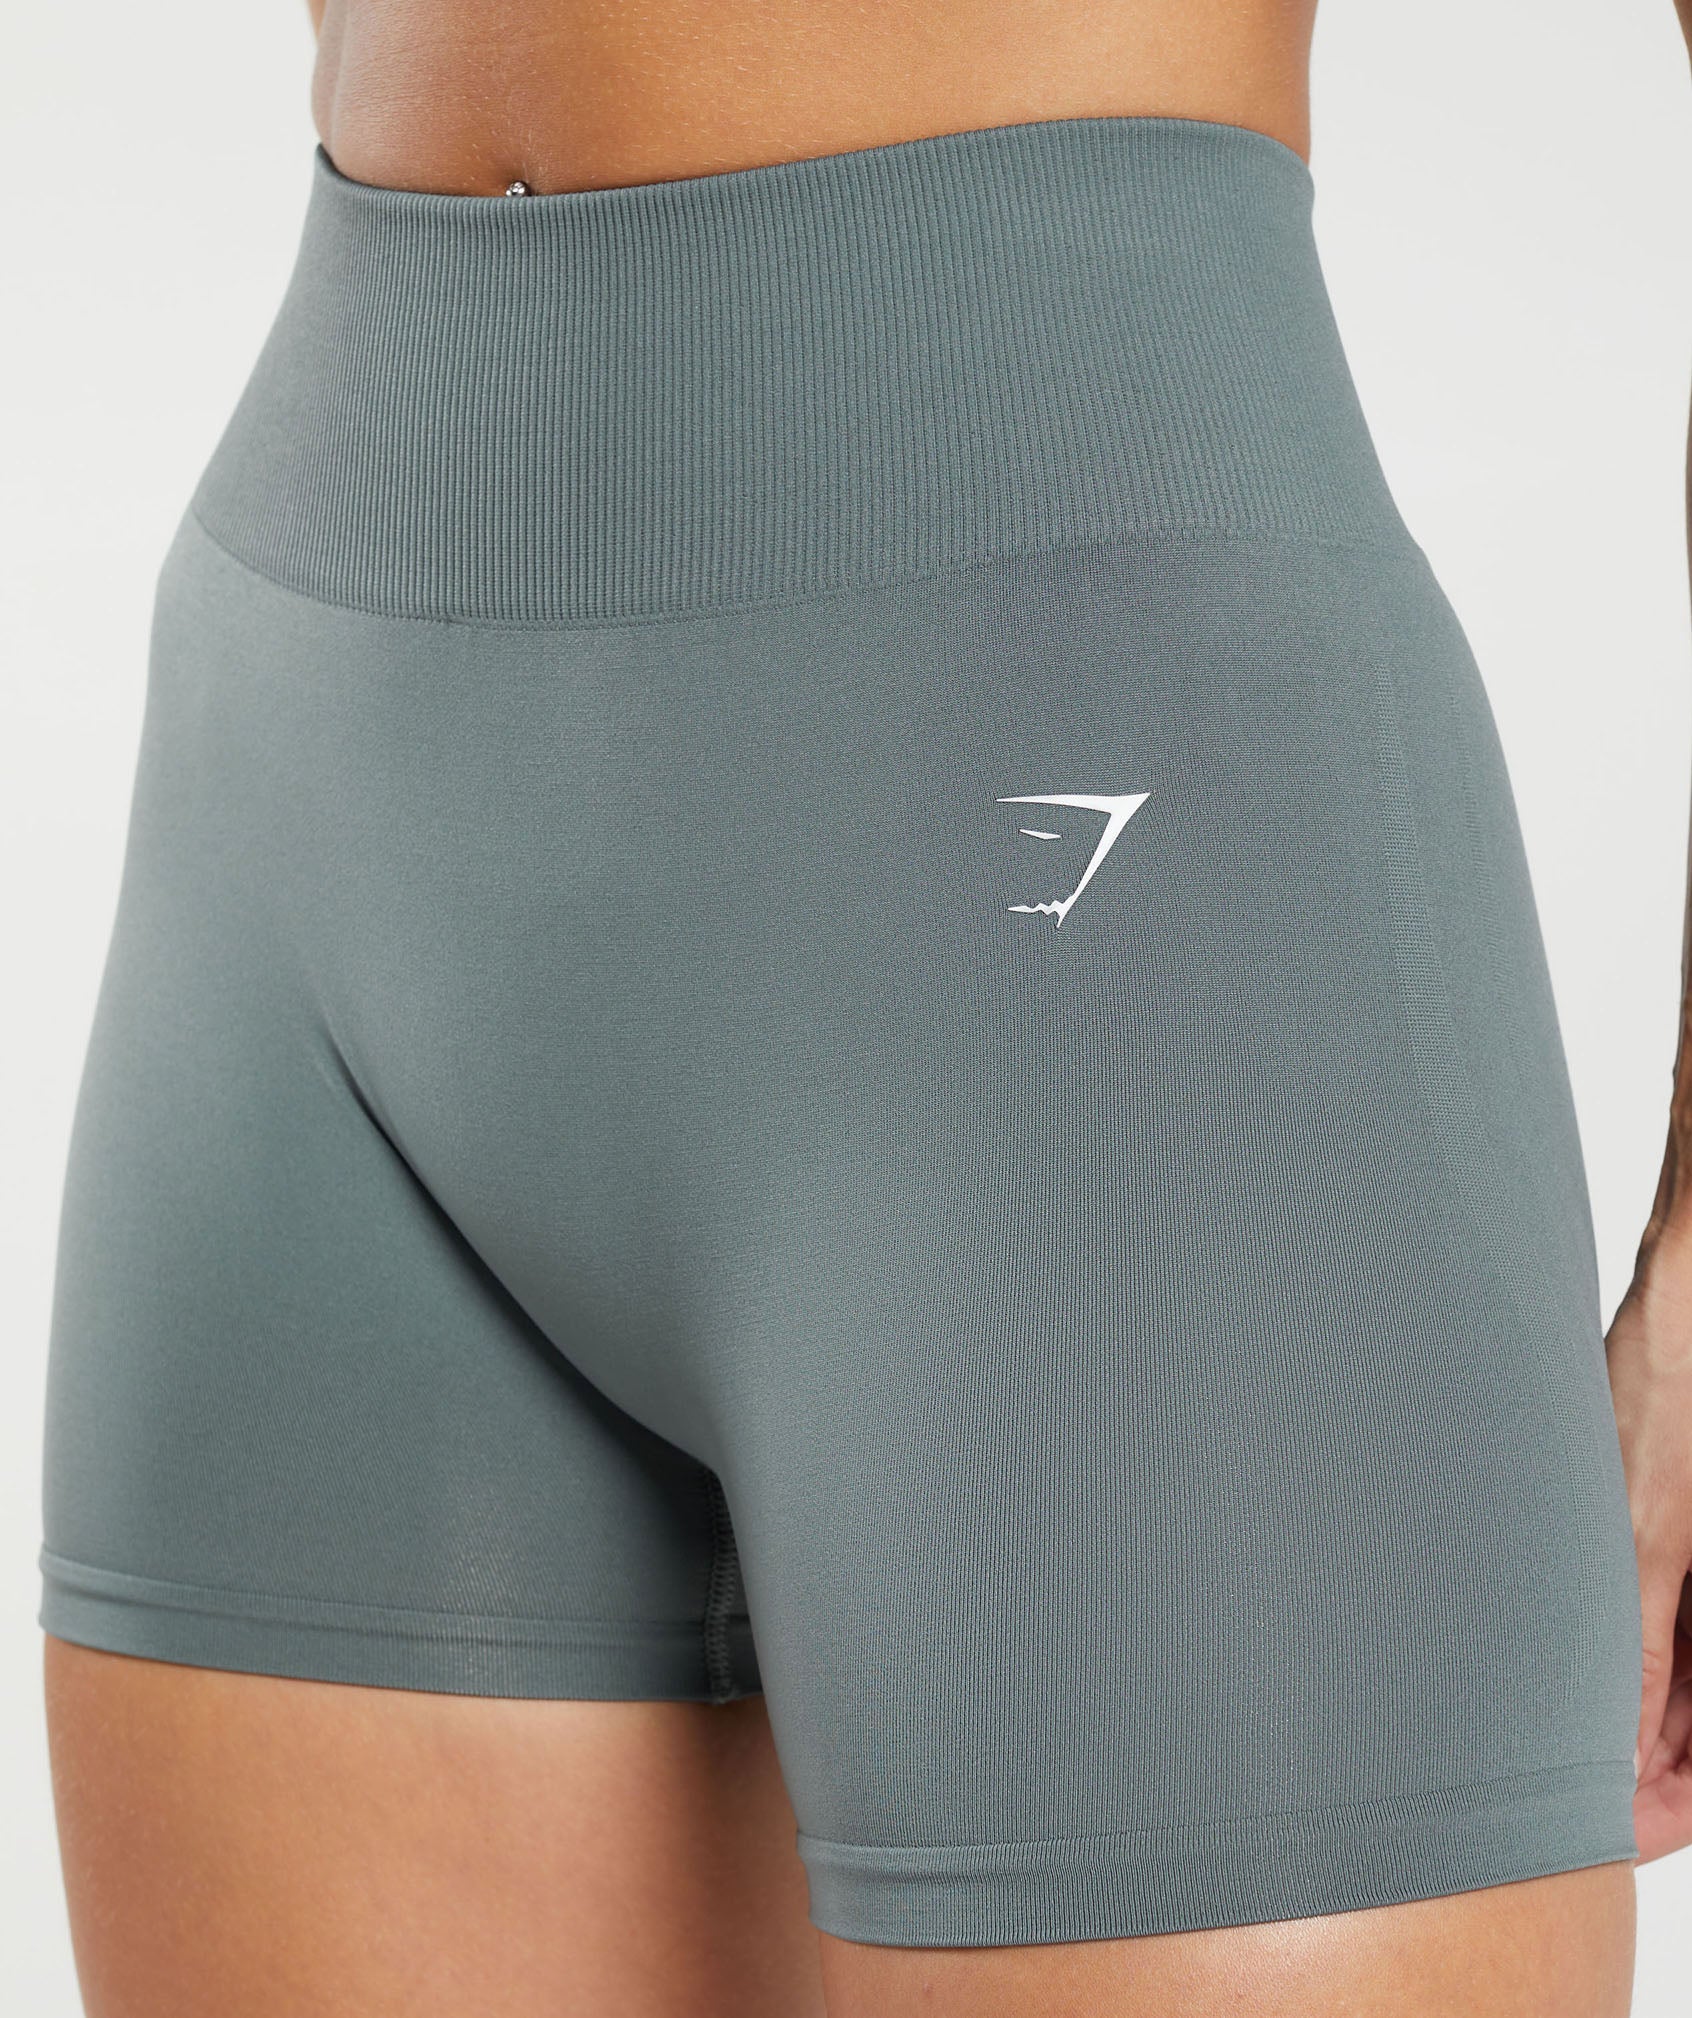 Everyday Seamless Shorts in Teal - view 5